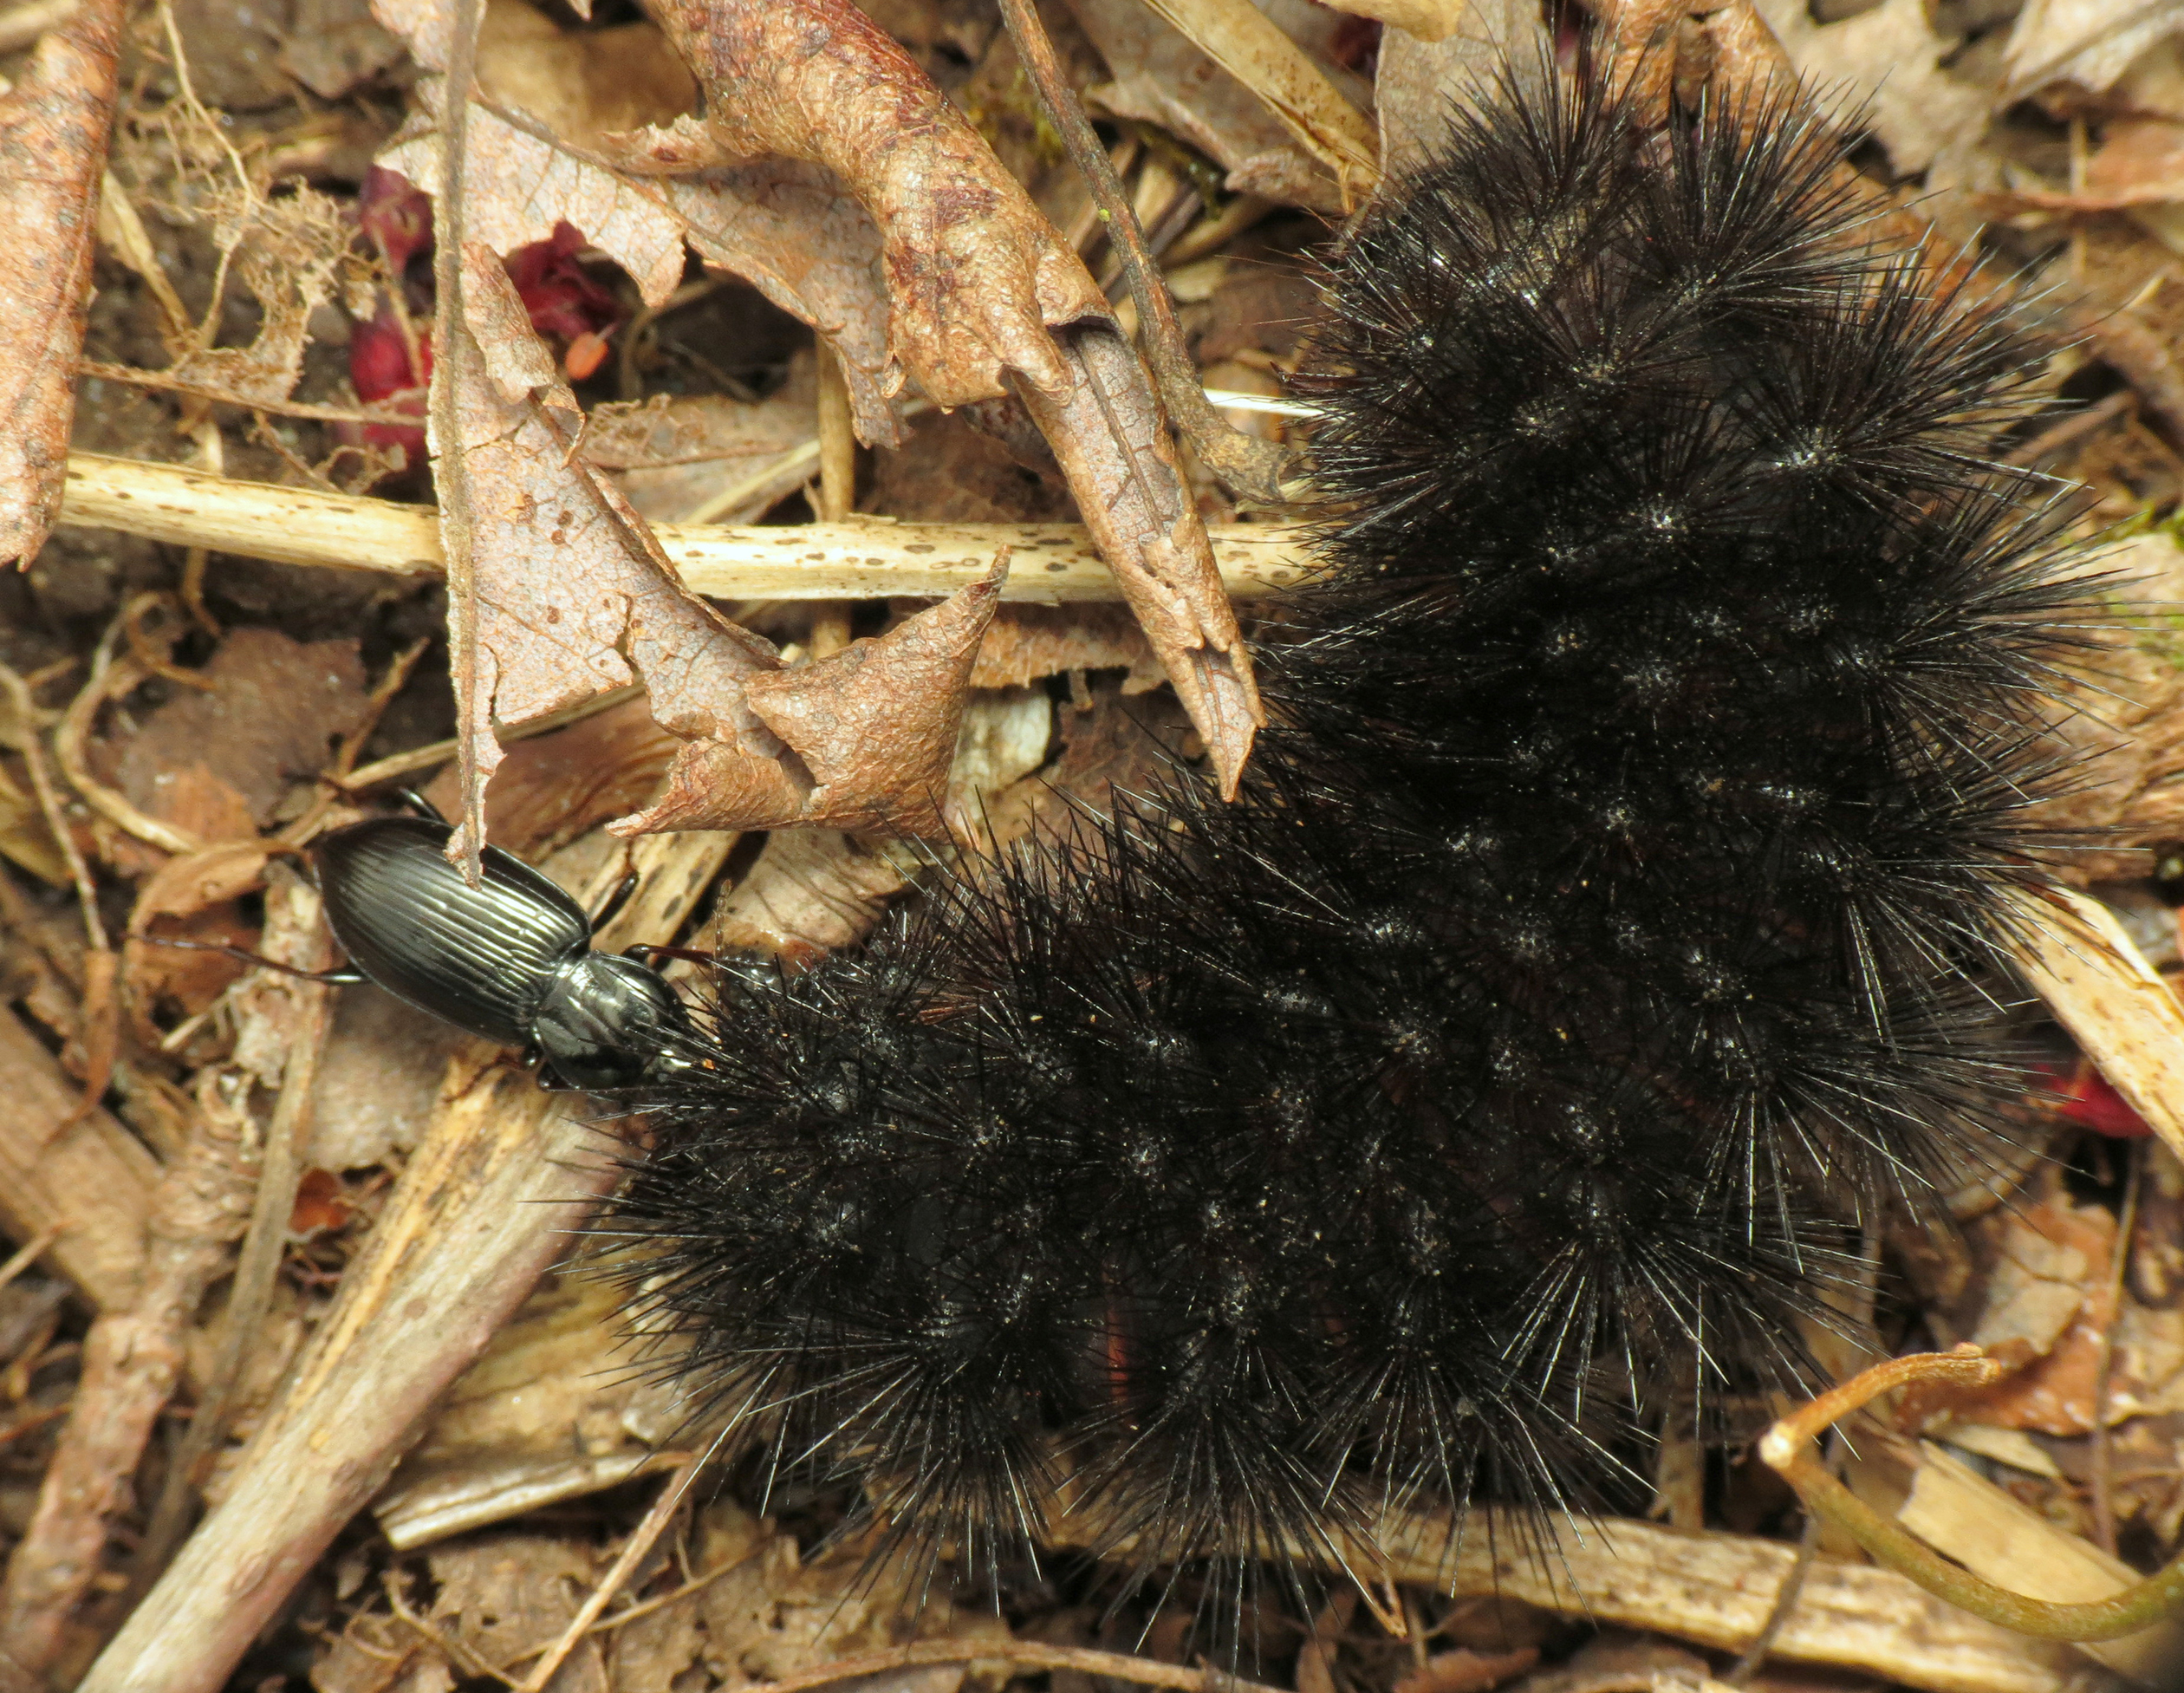 A small black beetle attacks a much larger and very hairy caterpillar.